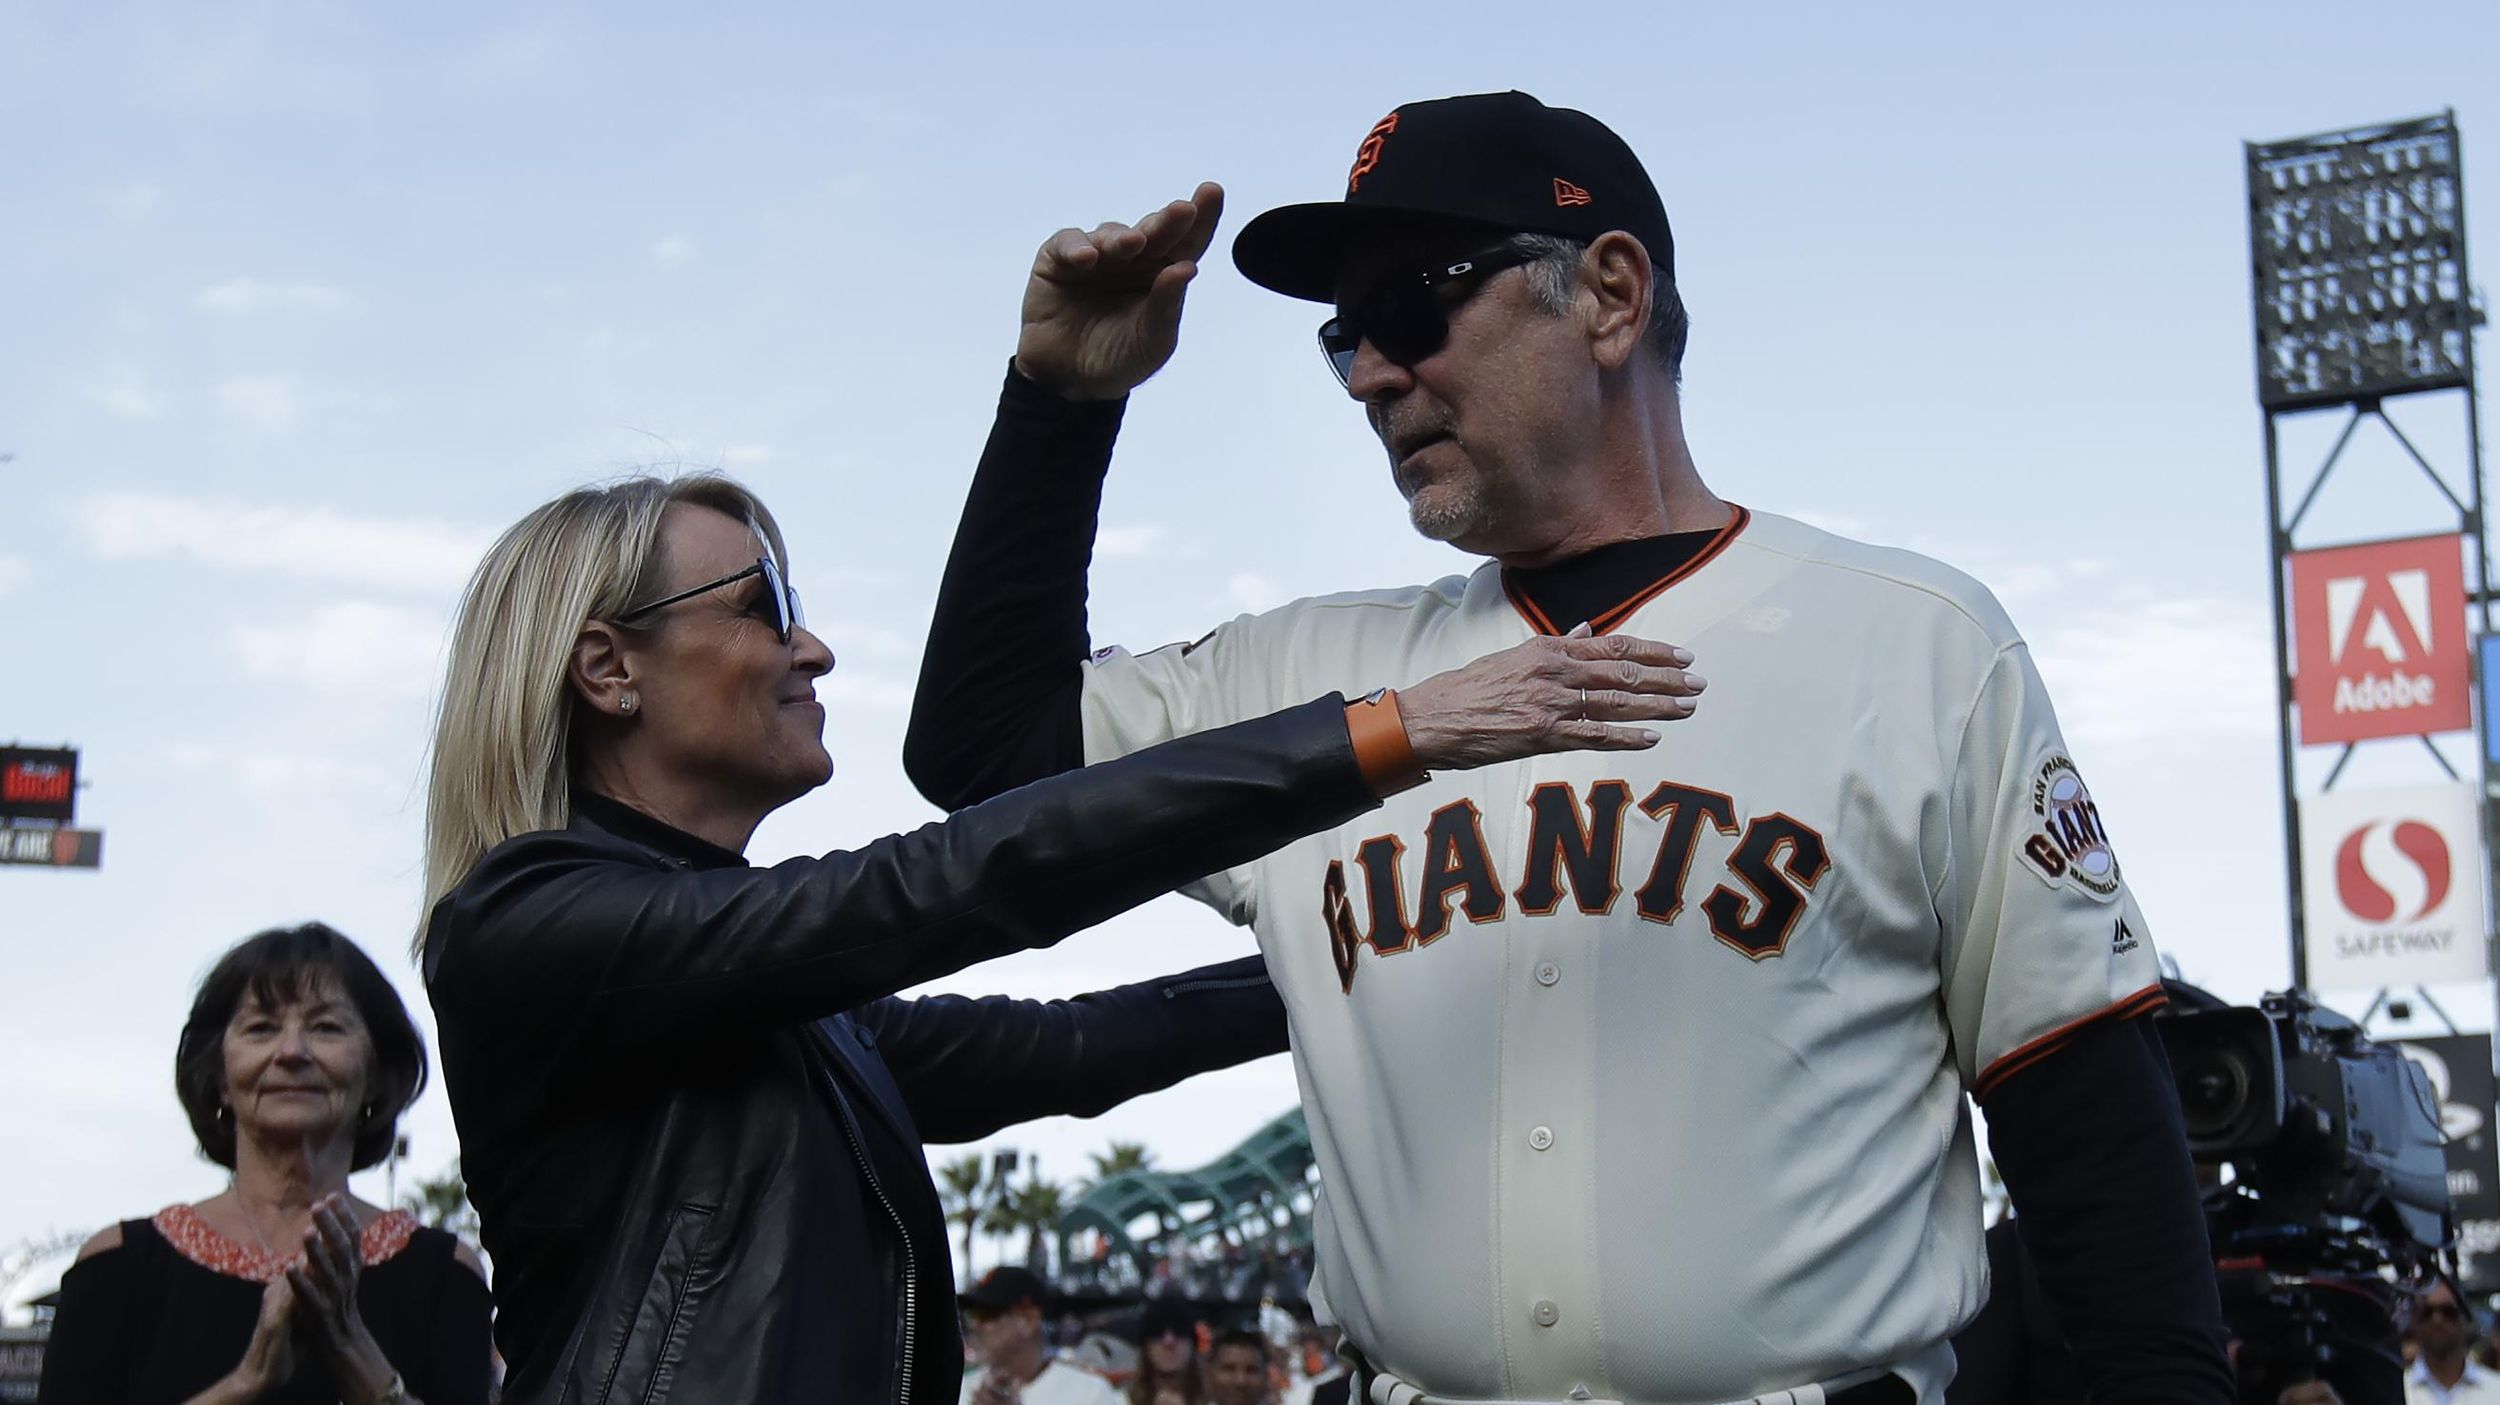 San Francisco Giants Manager Bruce Bochy Bids Farewell - The Ringer